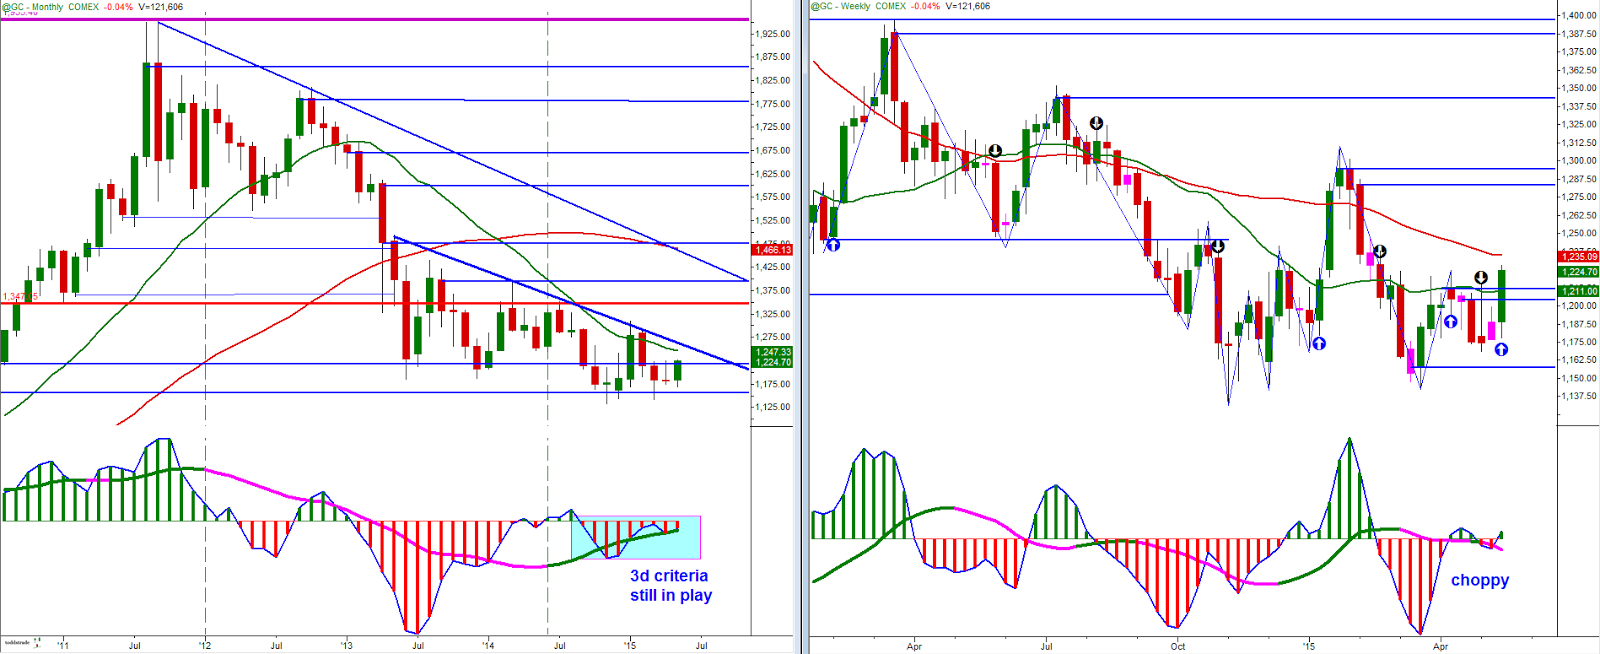 Gold Monthly and Weekly Charts